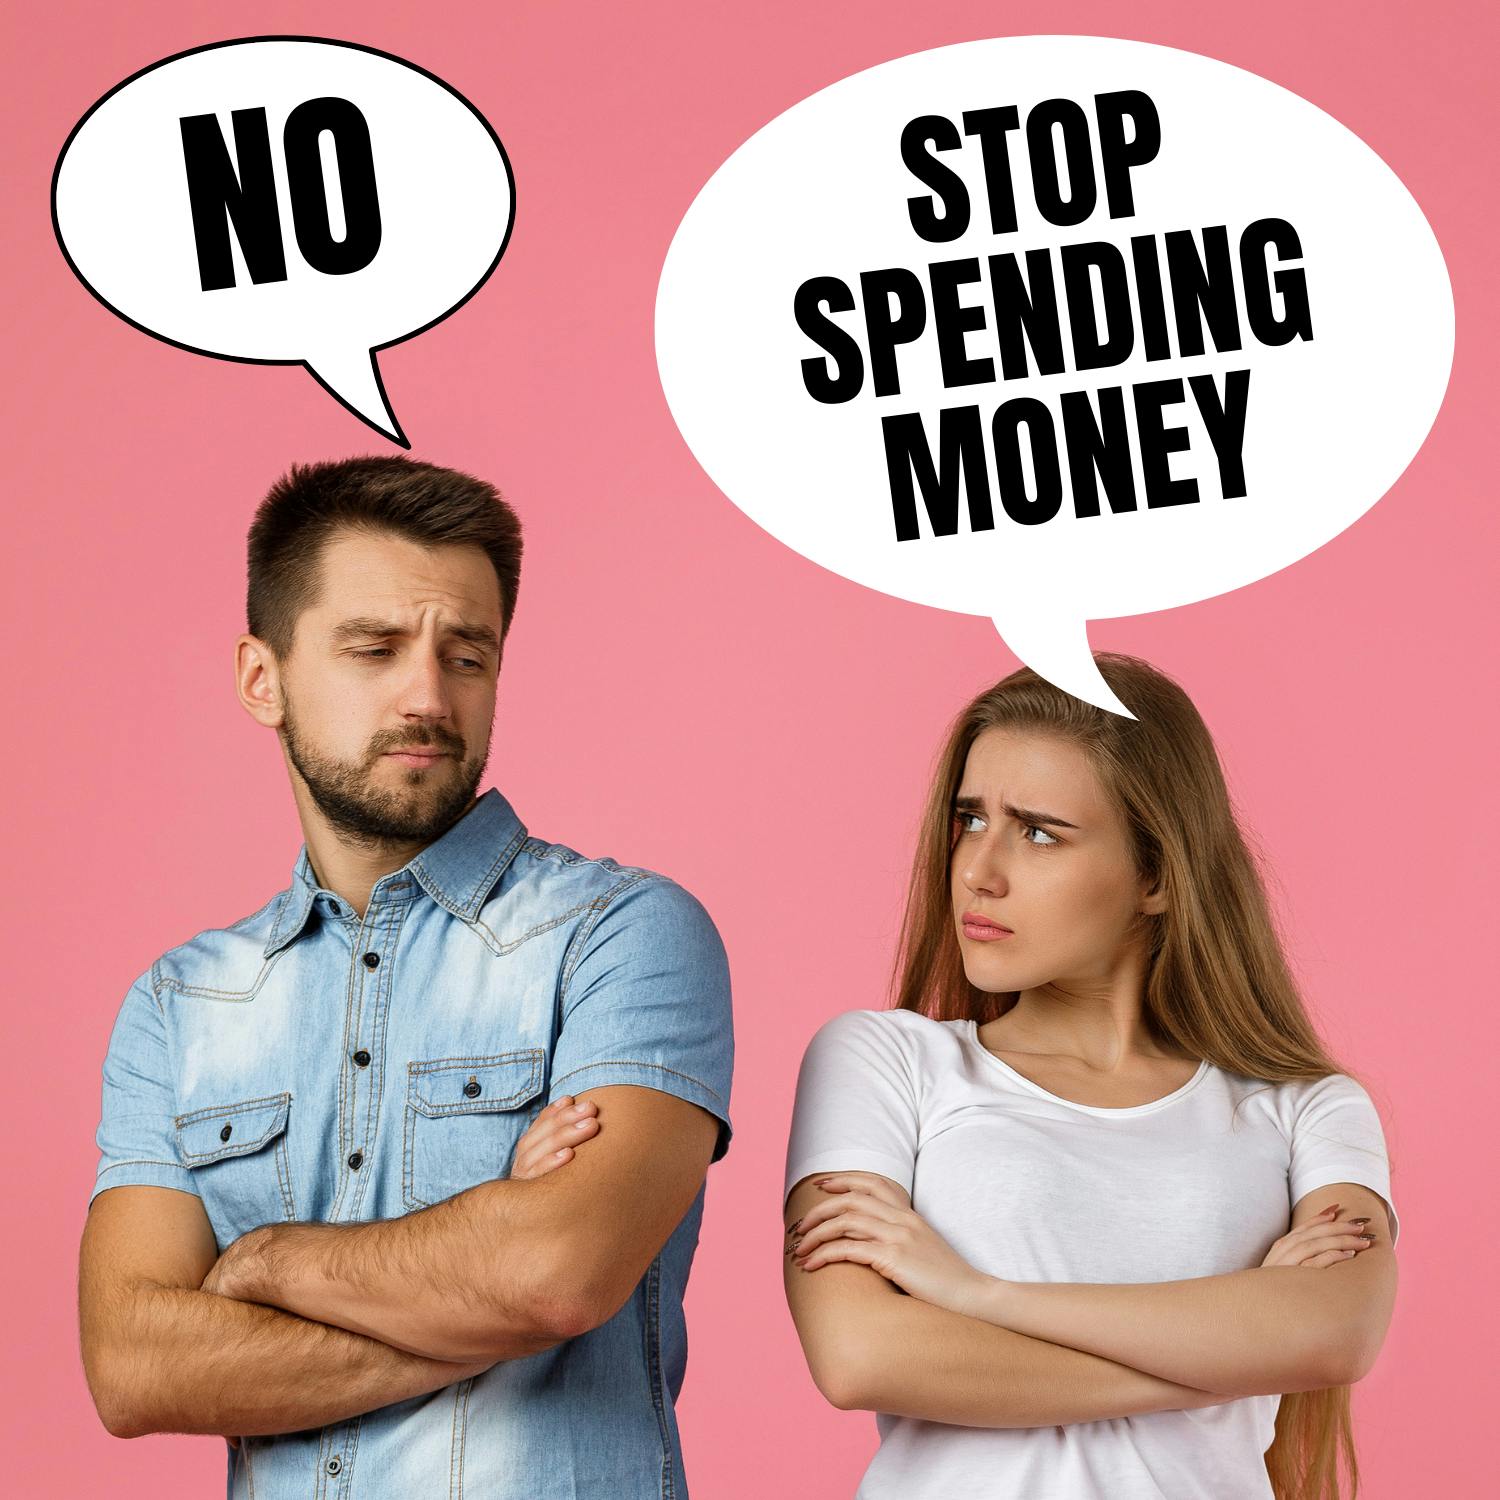 Does Your Spouse Need Money Rehab? Here's What To Do